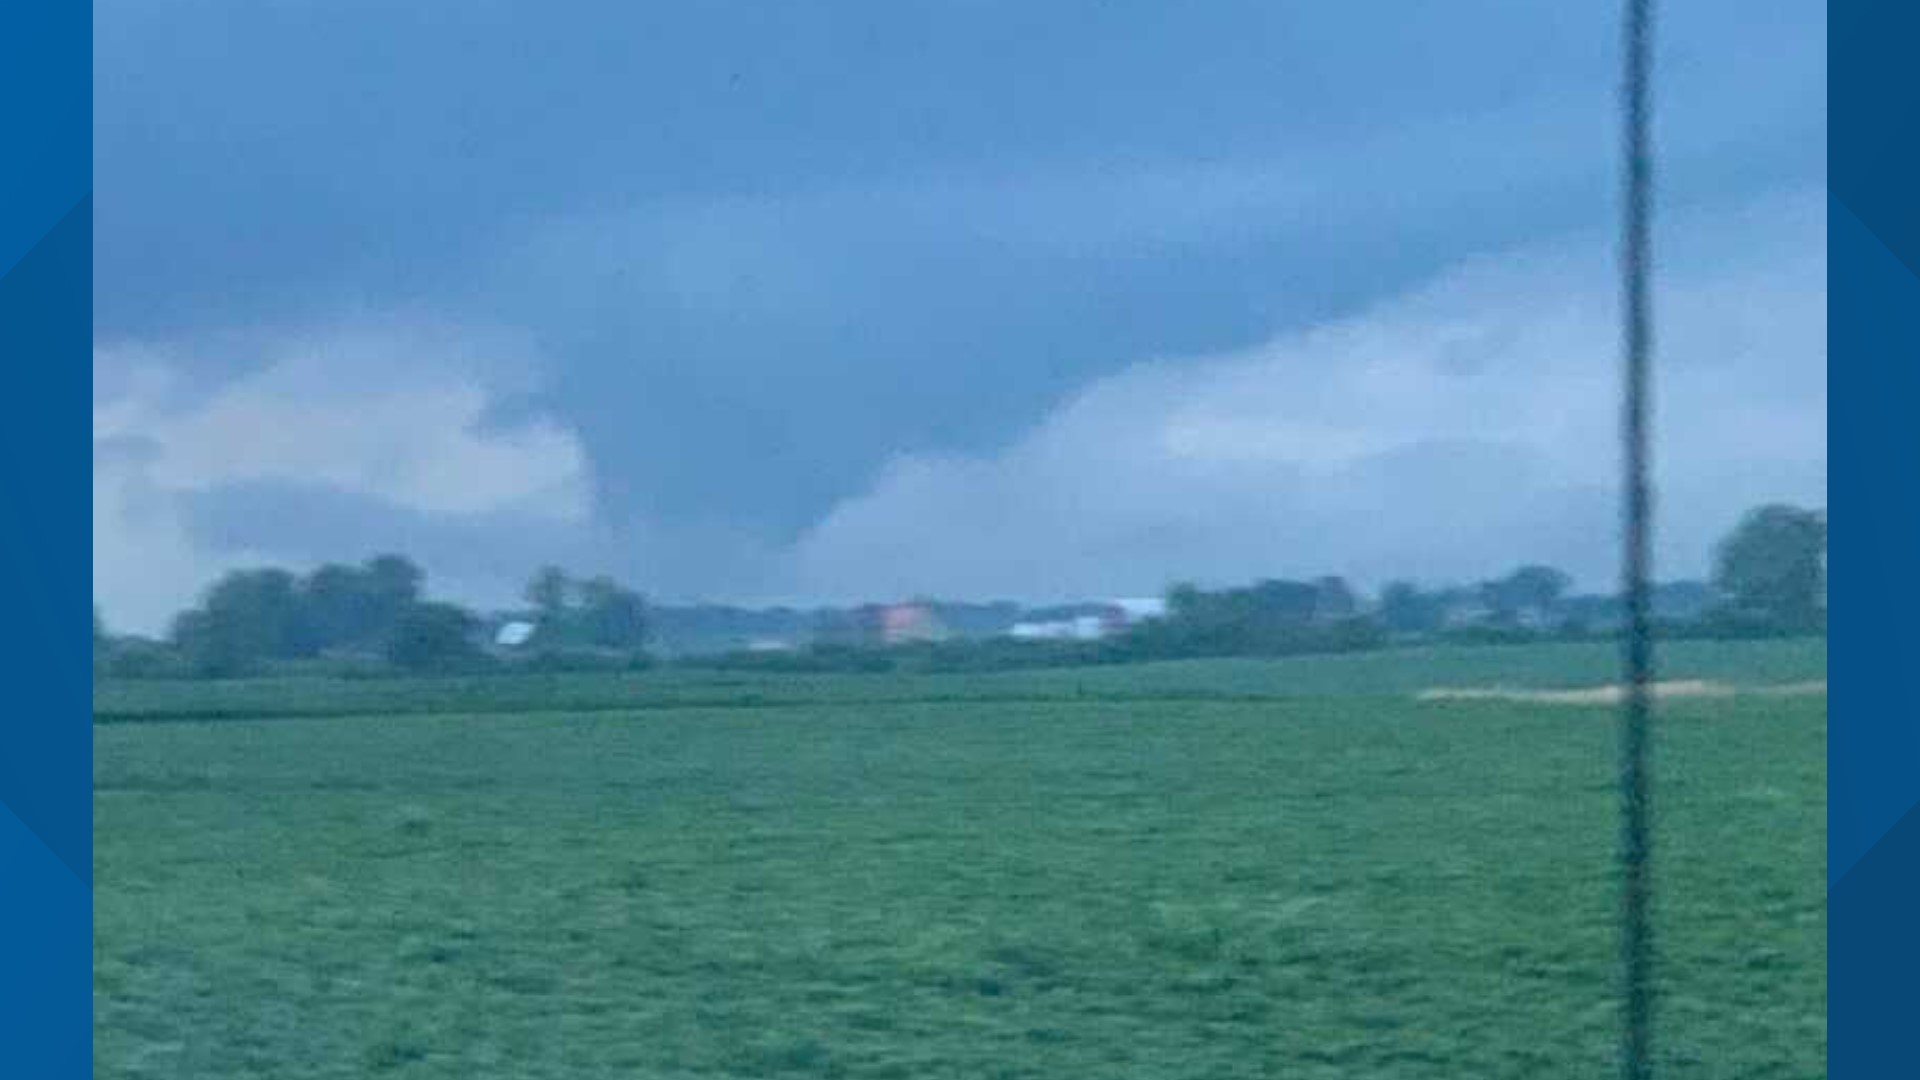 NWS confirms 2 tornadoes touched down in north central Indiana Friday